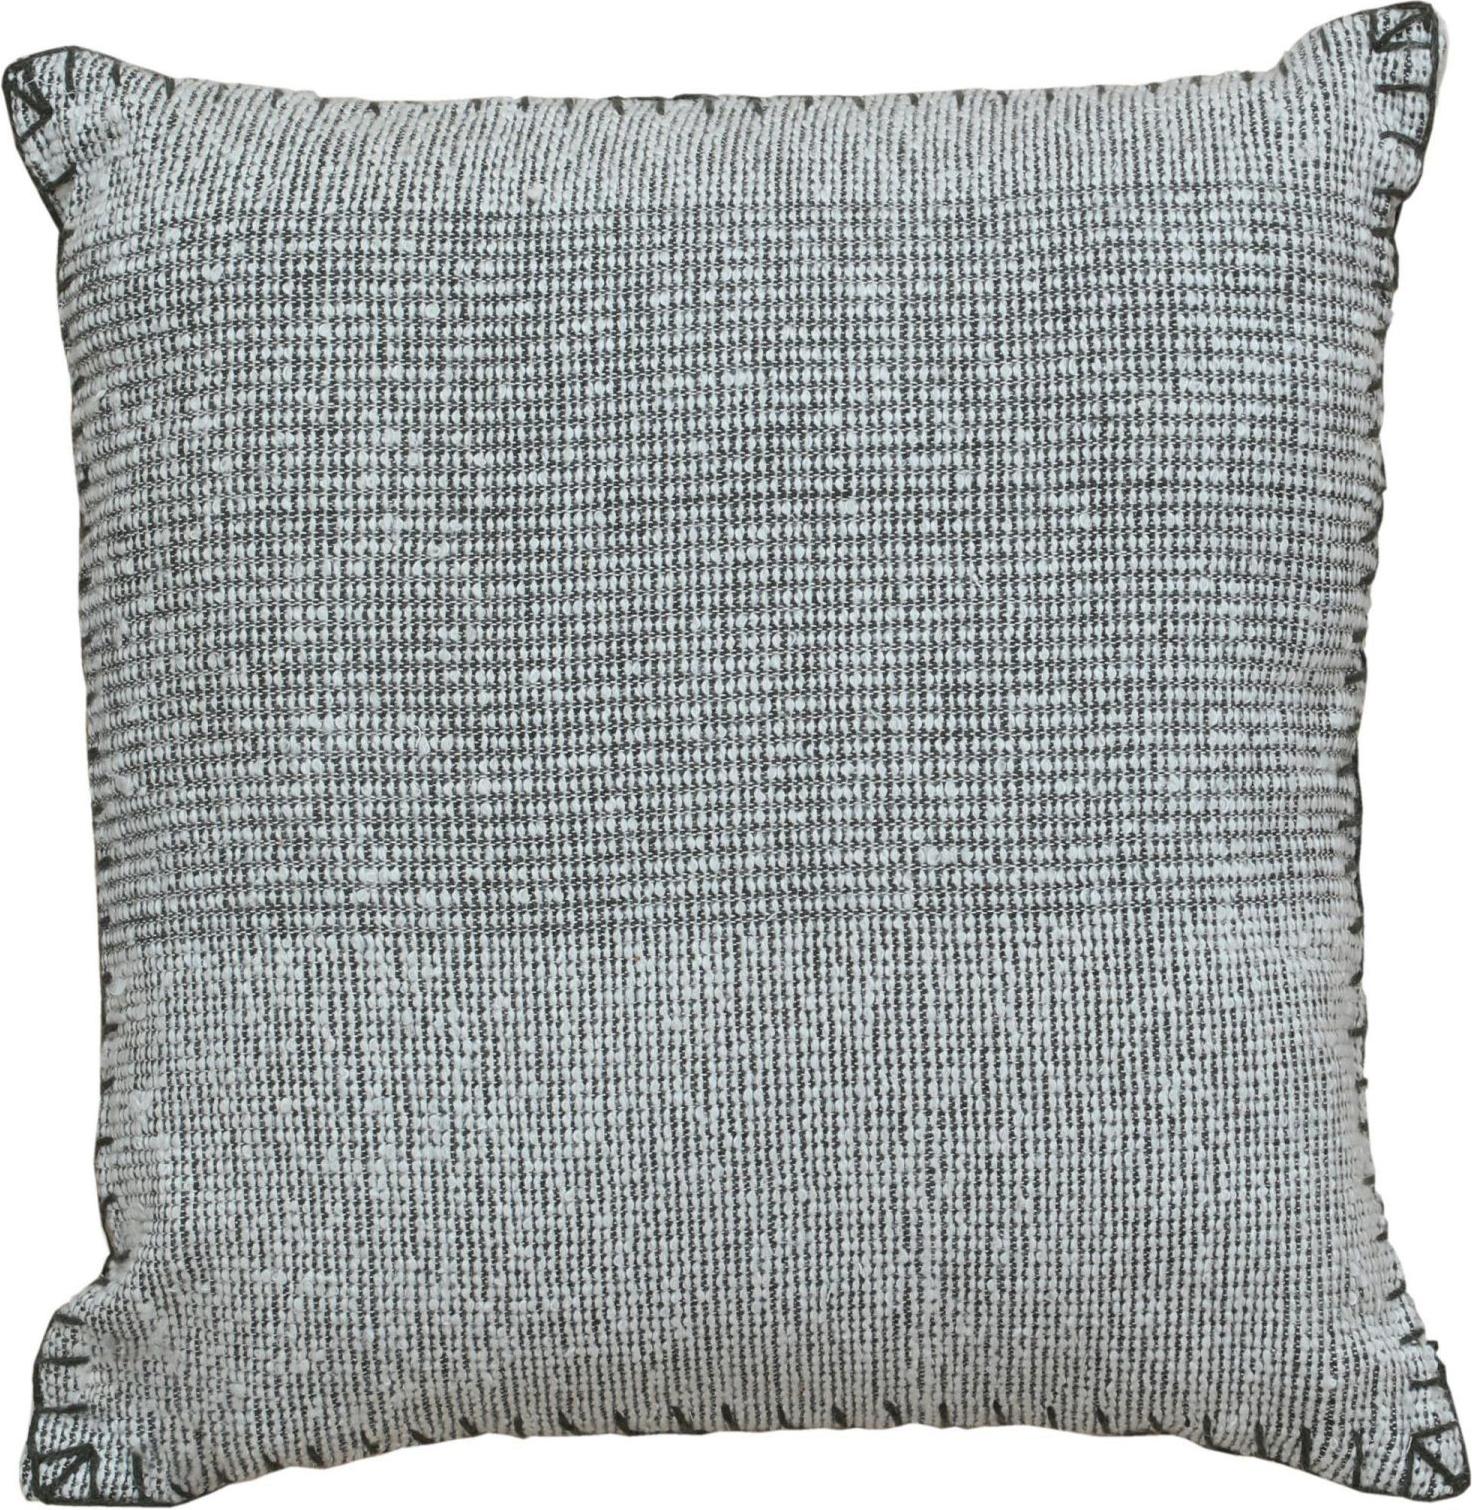 Indian Contemporary Boho Chic Wool and Cotton Pillow In Gray For Sale